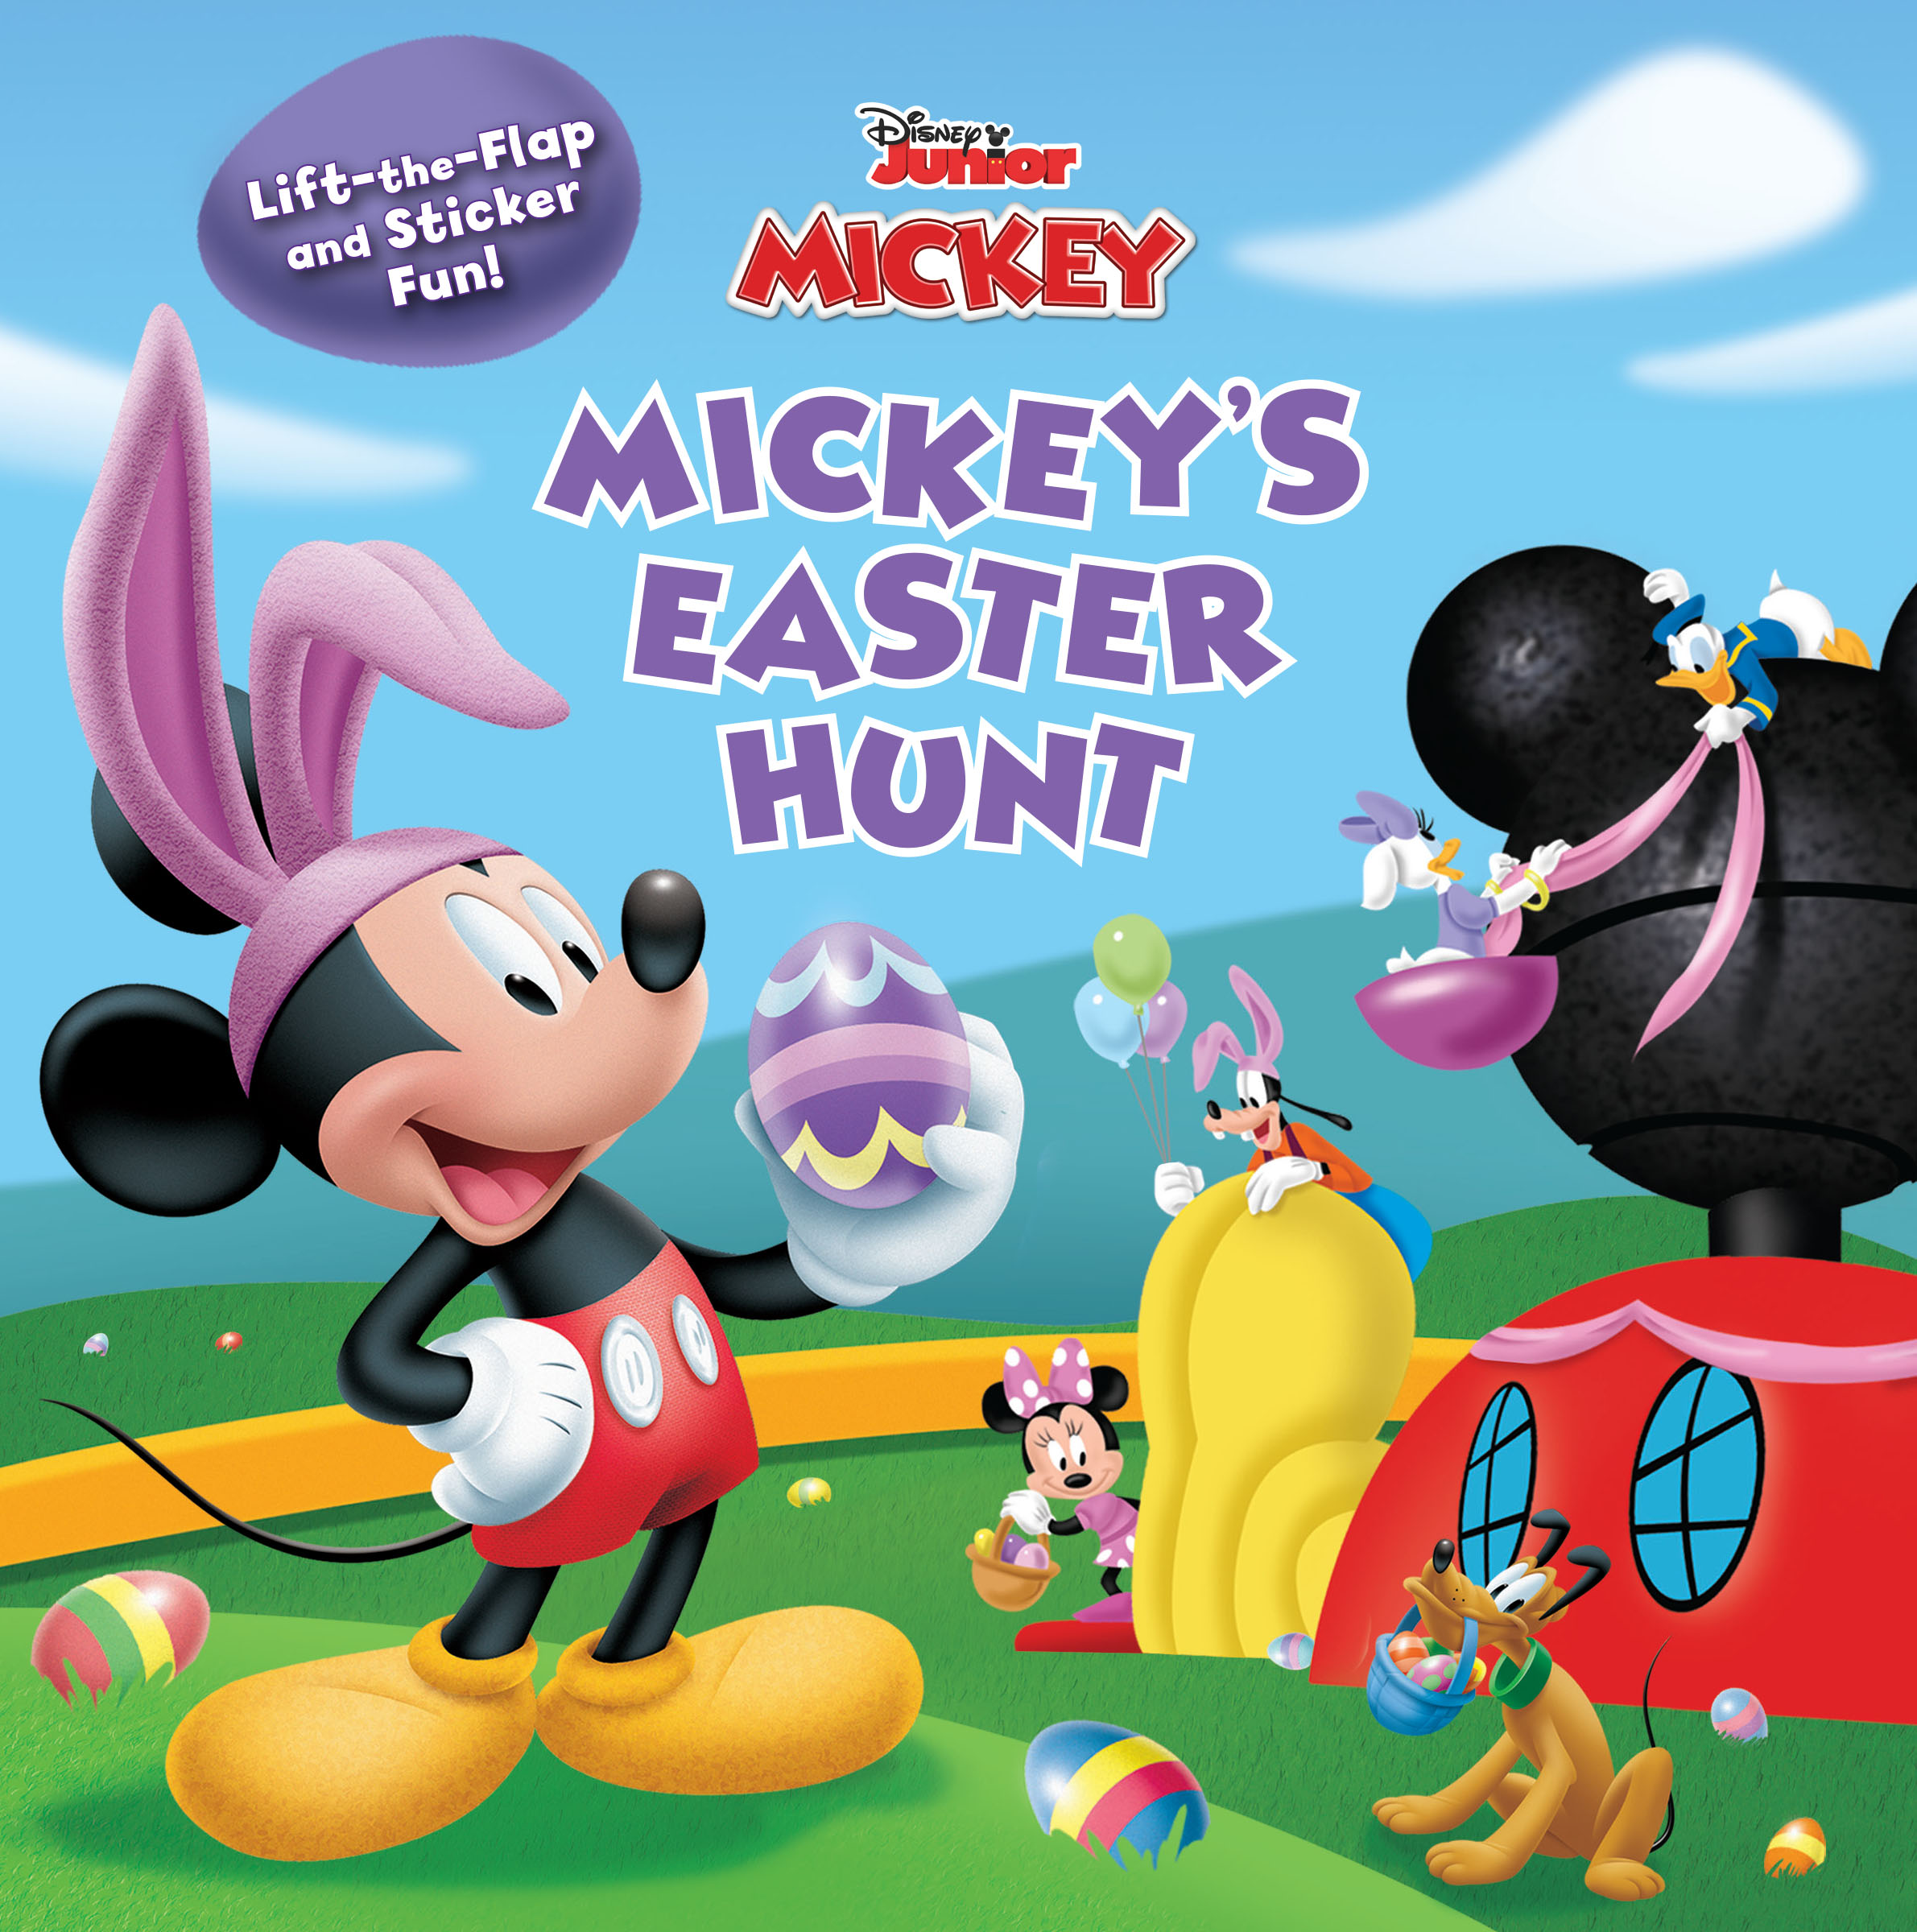 Disney's Mickey Mouse Clubhouse : Mickey's Treat [ DVD ] @